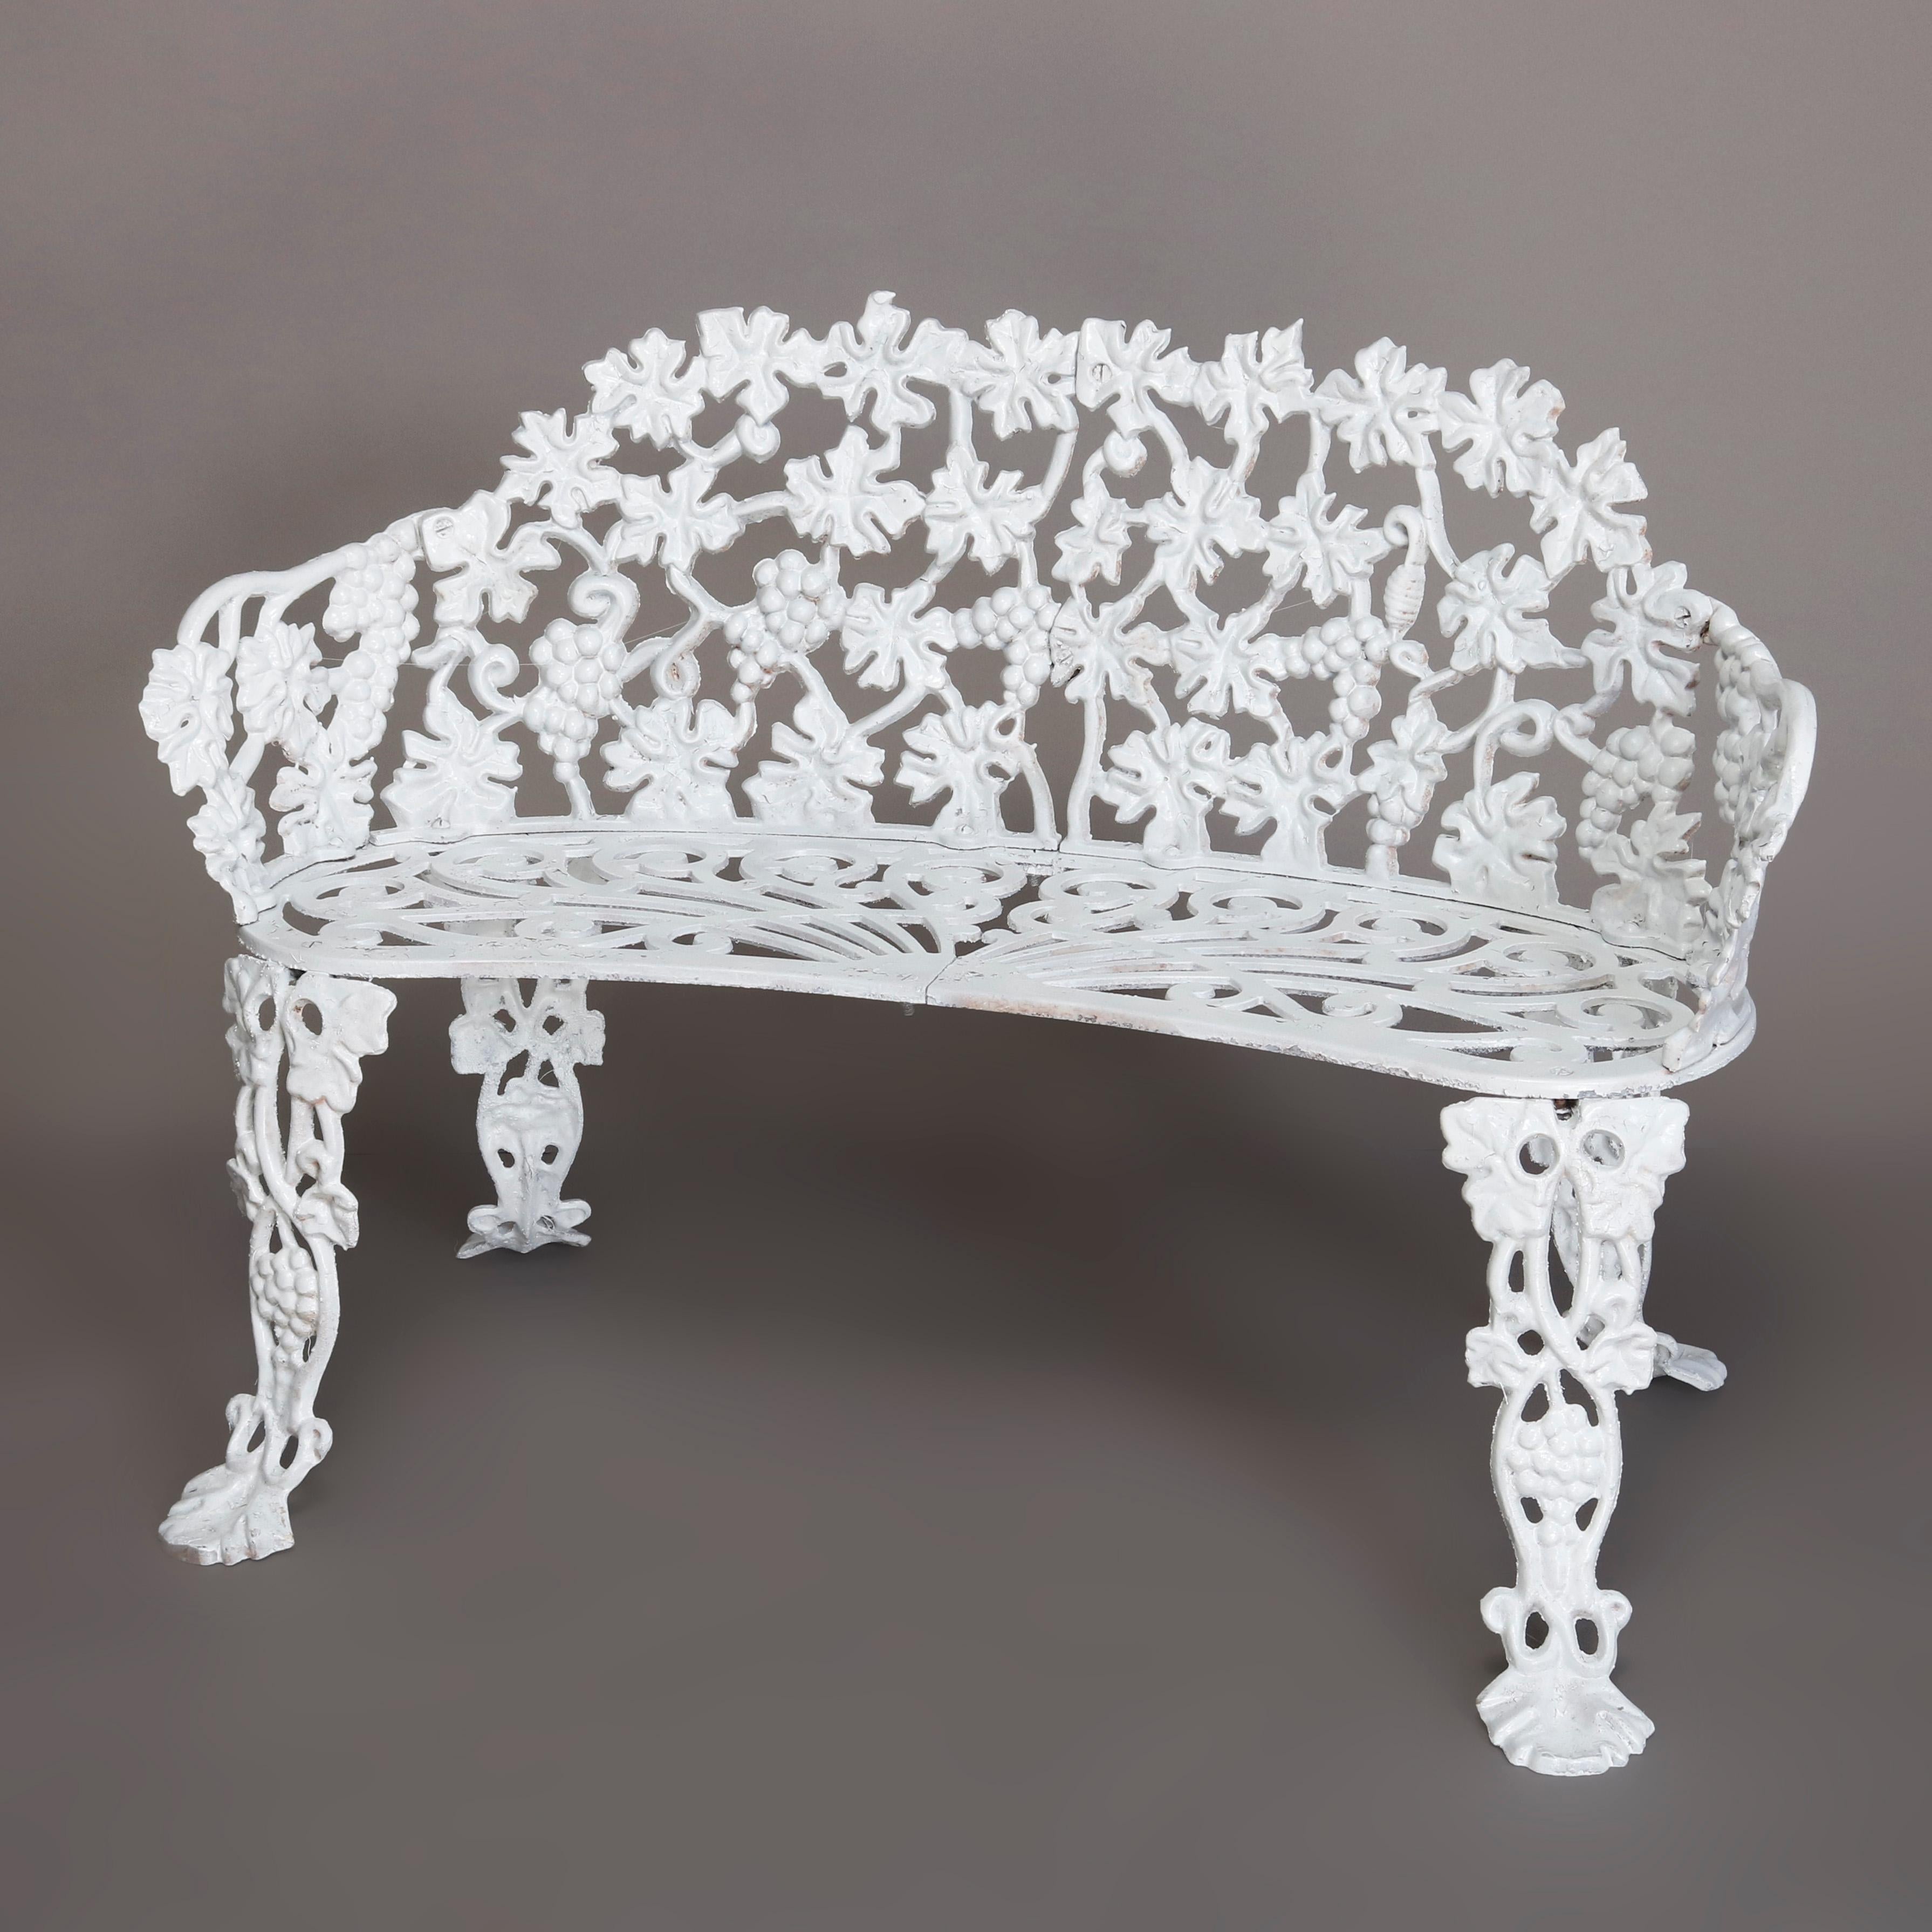 An antique Victorian 3-piece garden seating set by Hart offers painted white cast iron construction in grape and leaf form and includes settee, armchair and table, marked Hart on back and Atlanta Stove Works on bench underside, circa